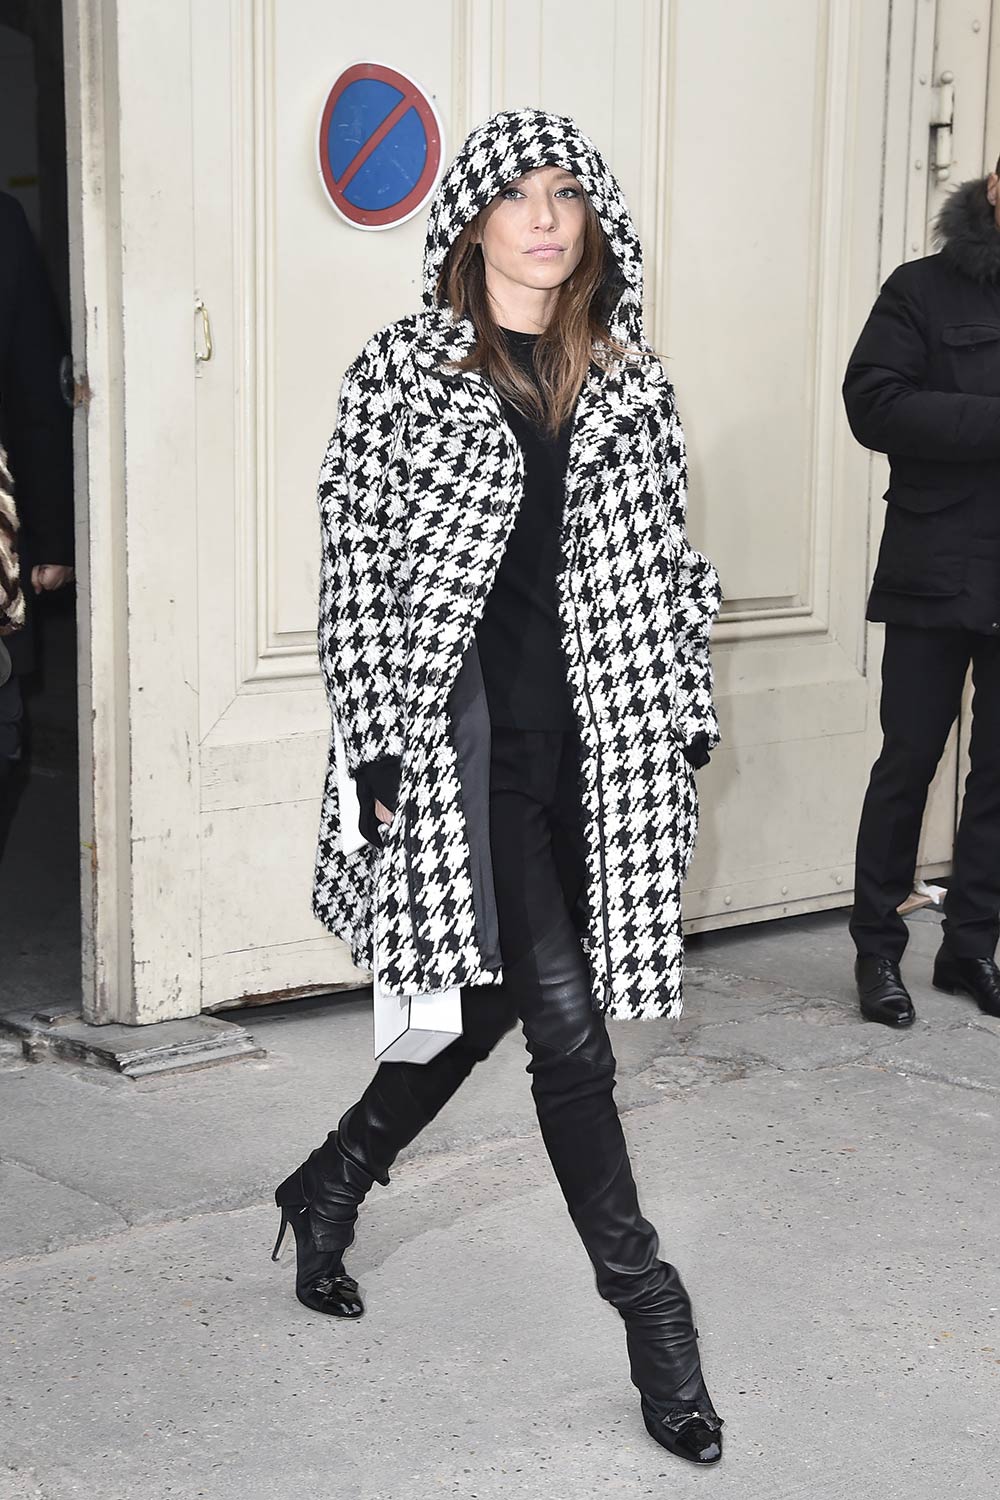 Laura Smet arrives at the Chanel Haute Couture Spring Summer 2017 show